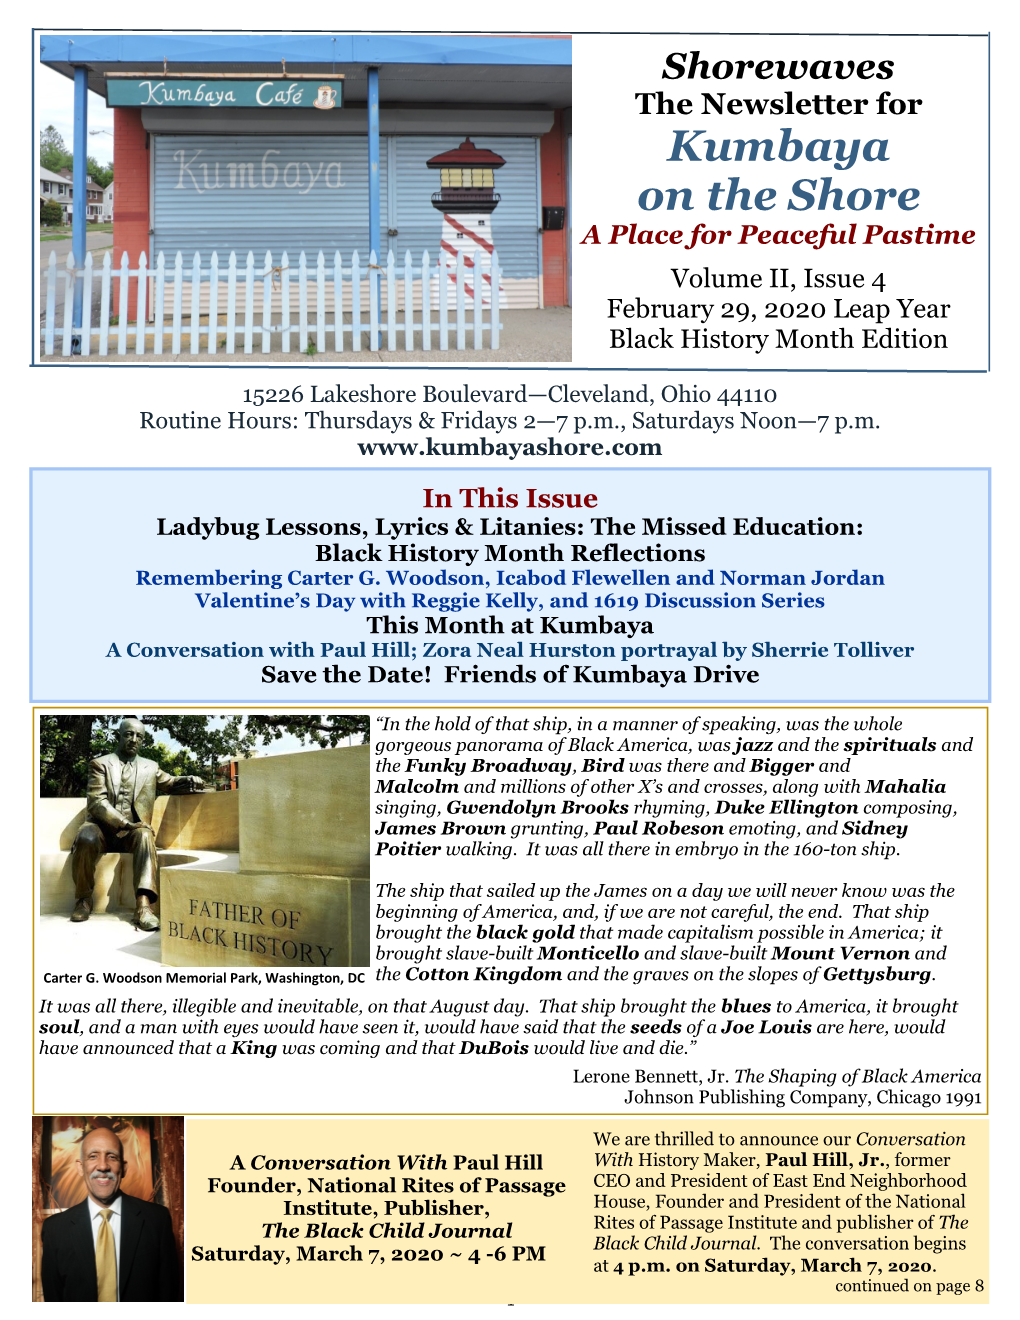 Shorewaves the Newsletter for Kumbaya on the Shore a Place for Peaceful Pastime